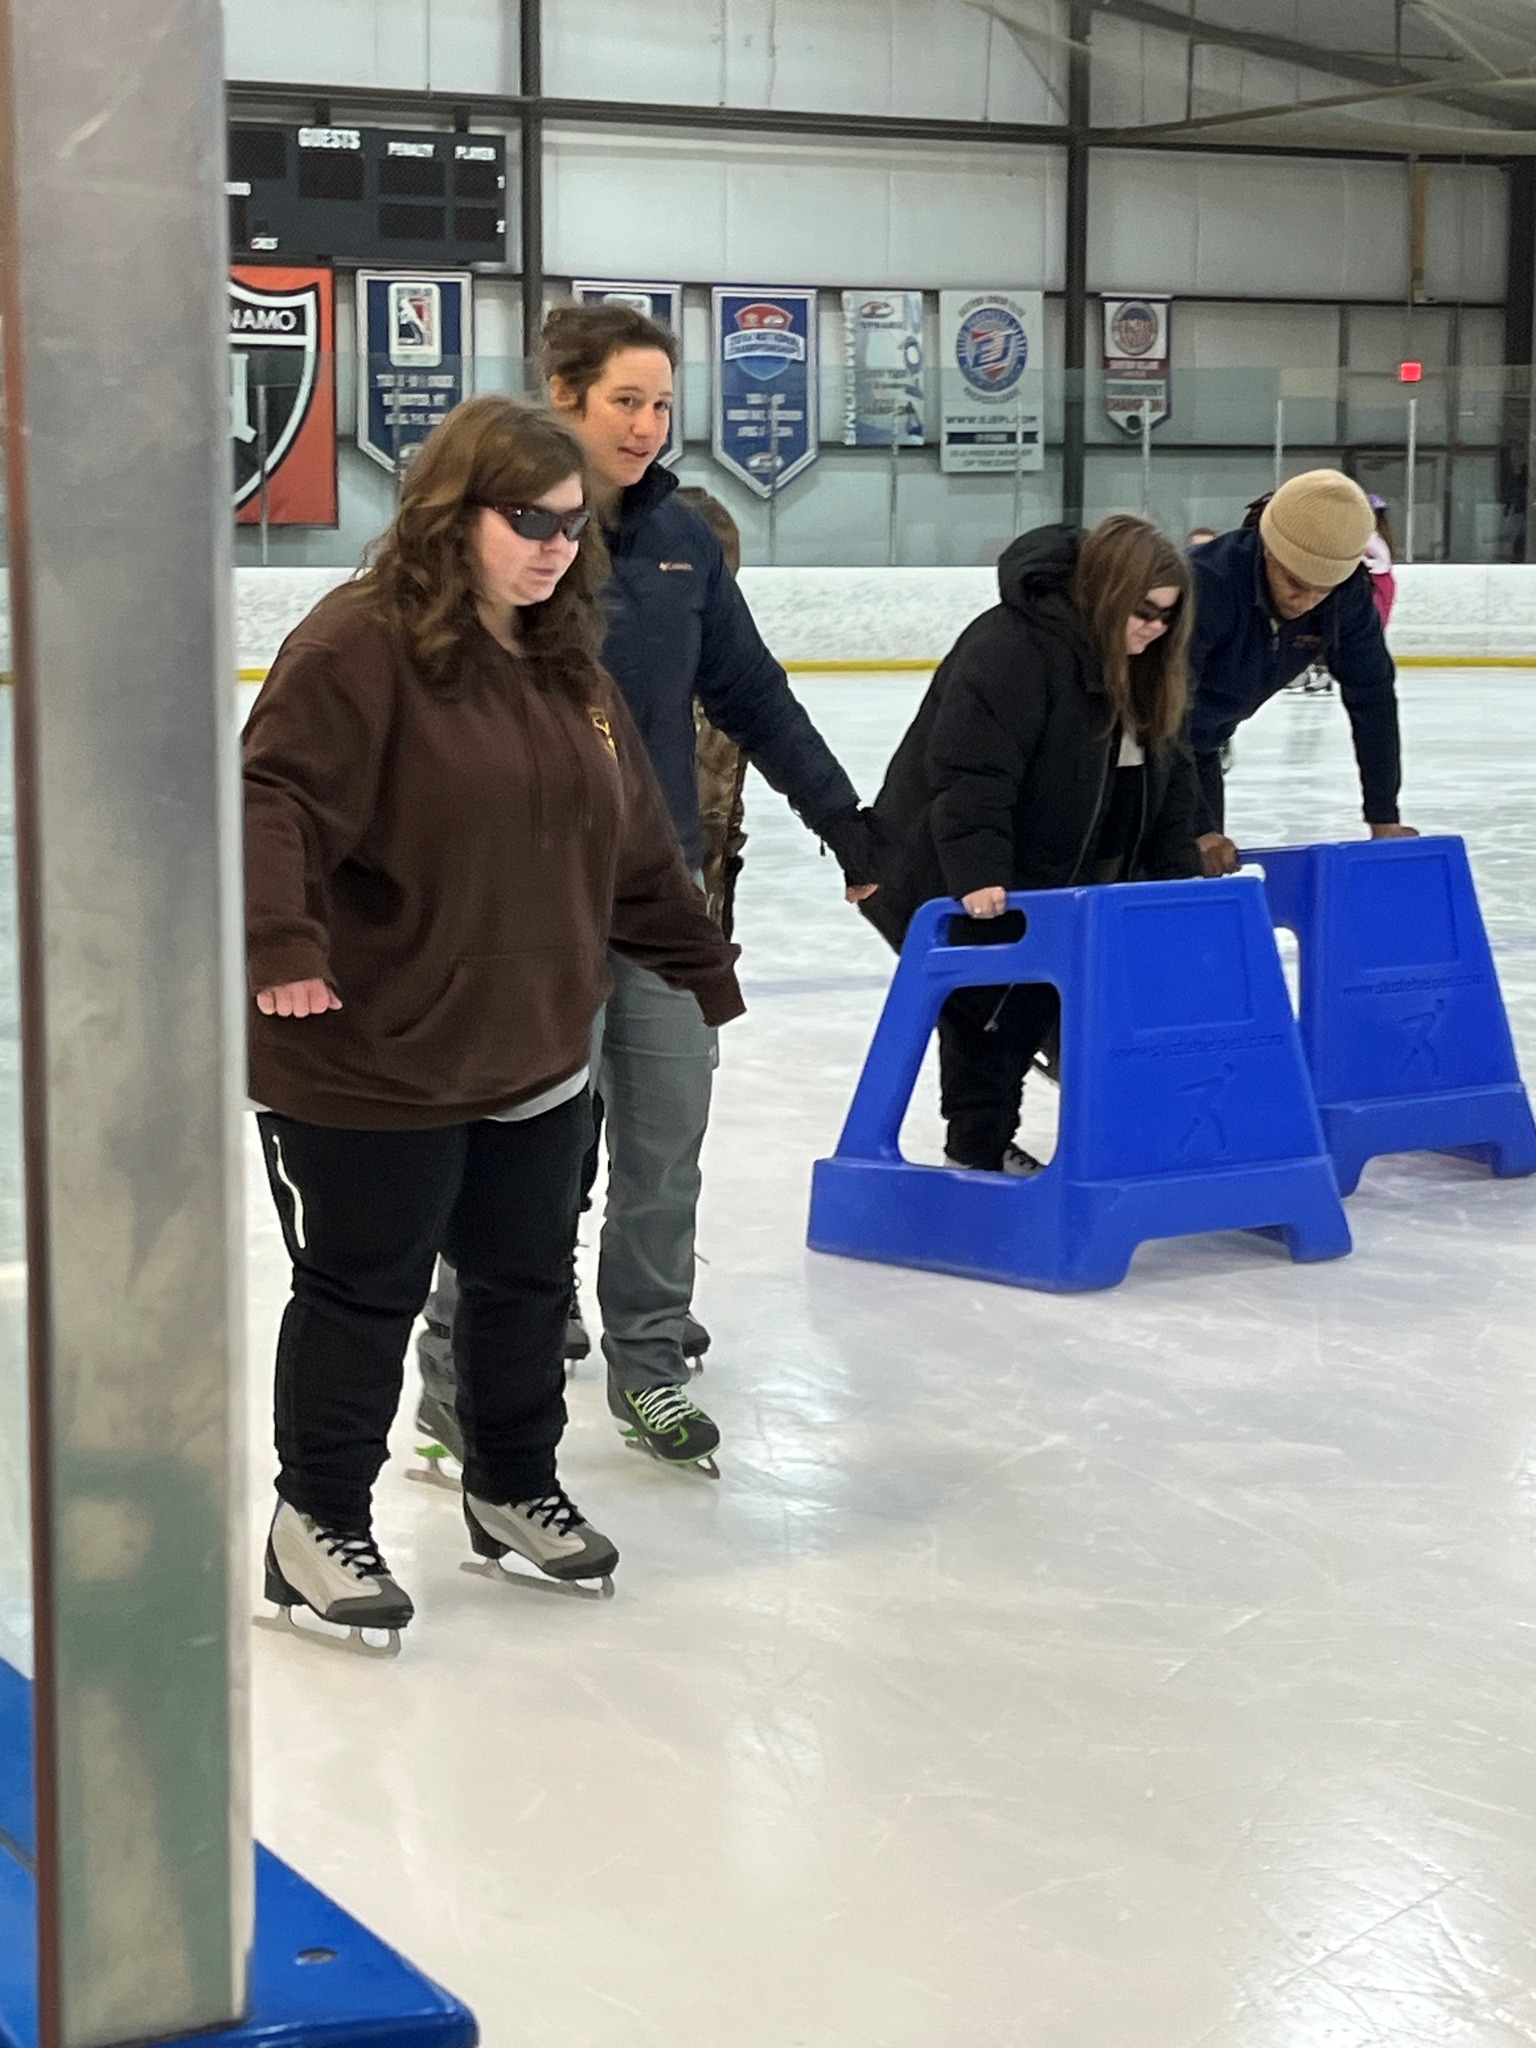 Group of visually impaired people ice skating with guides